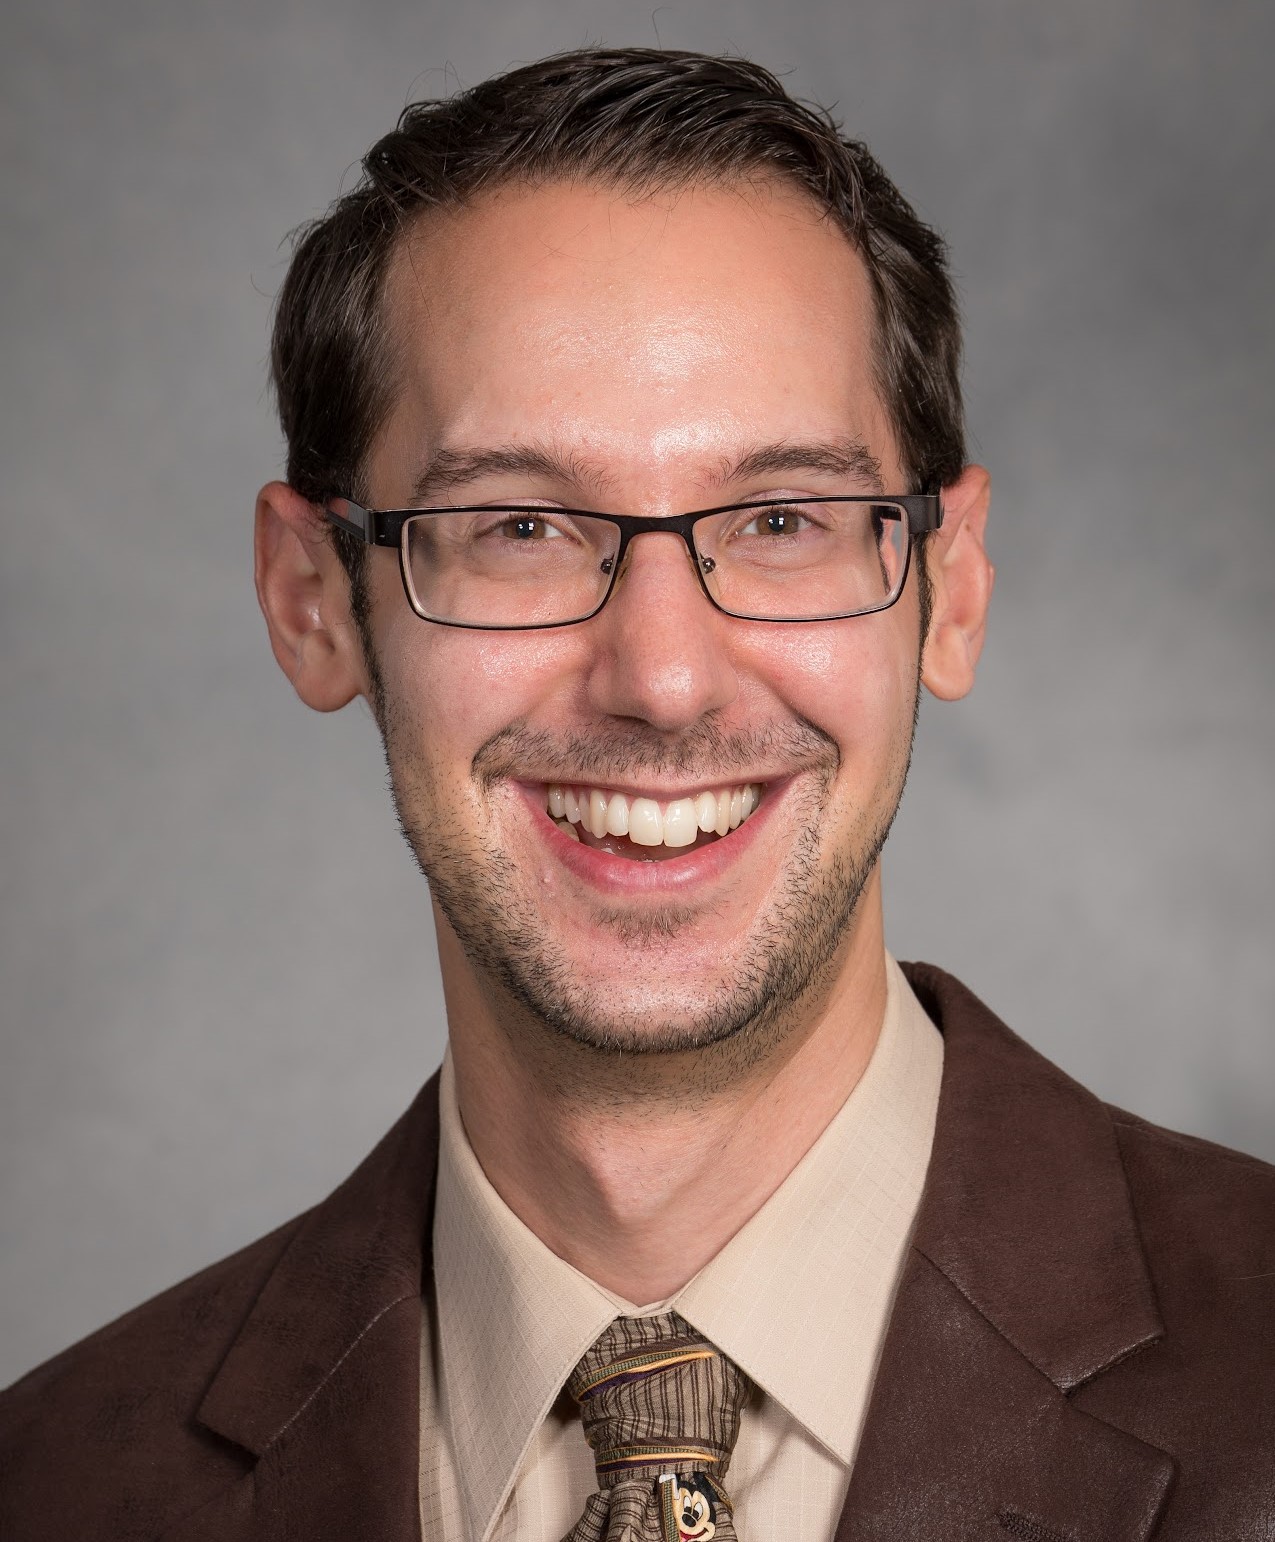 Photo of Dr. Brett Ranon Nachman, smiling man with rectangular glasses wearing a brown suit and patterned tie